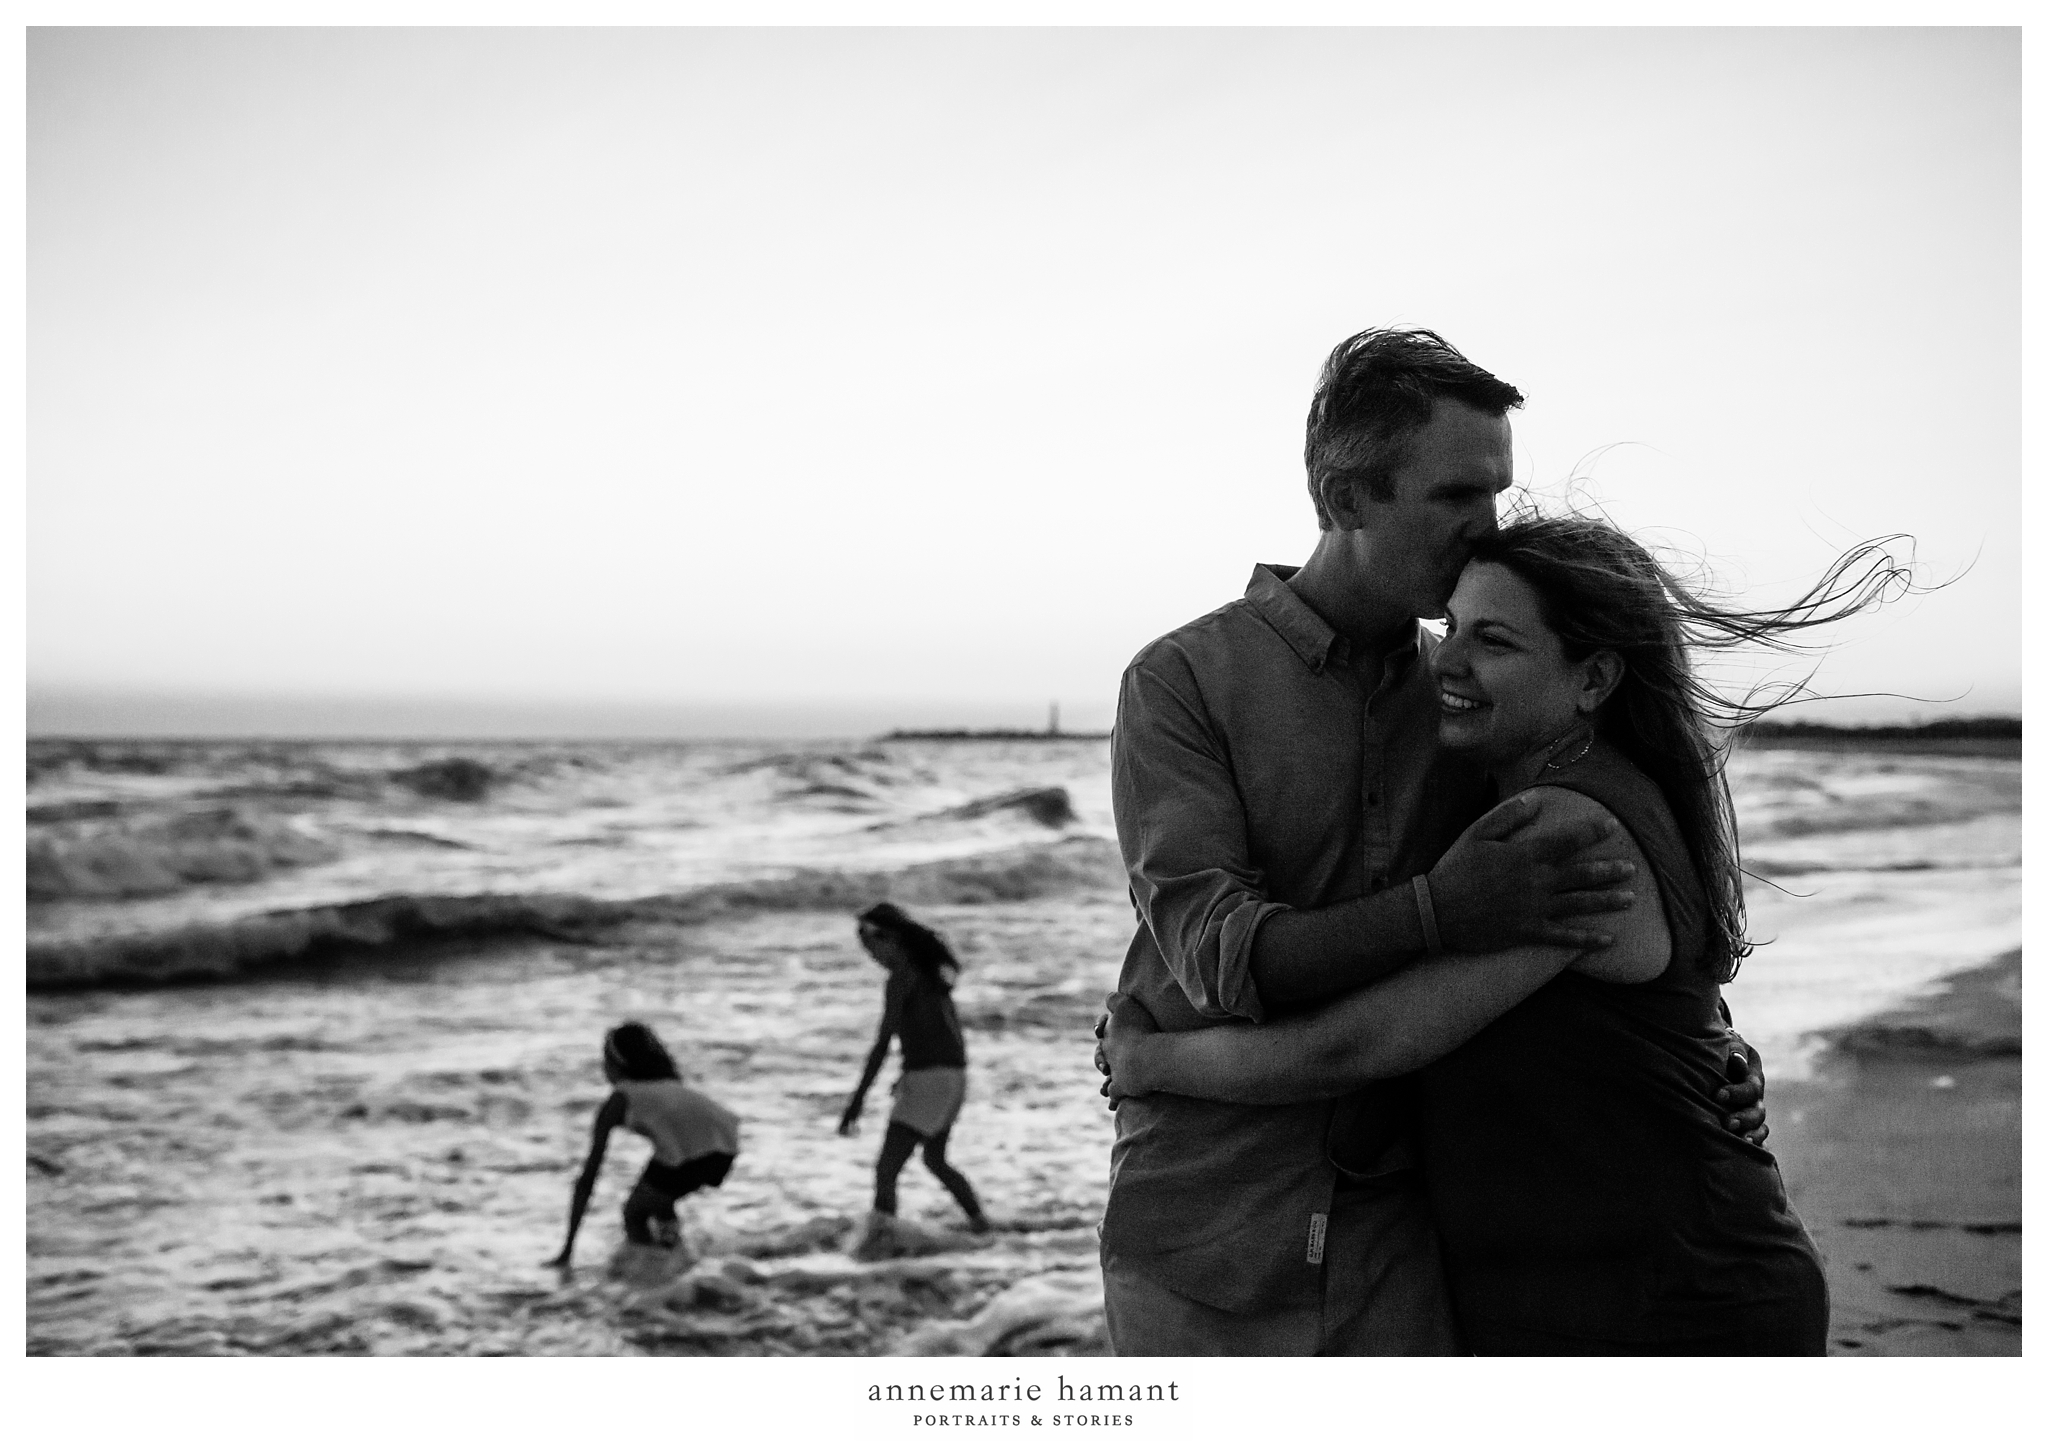 cape may new jersey vacation photographer